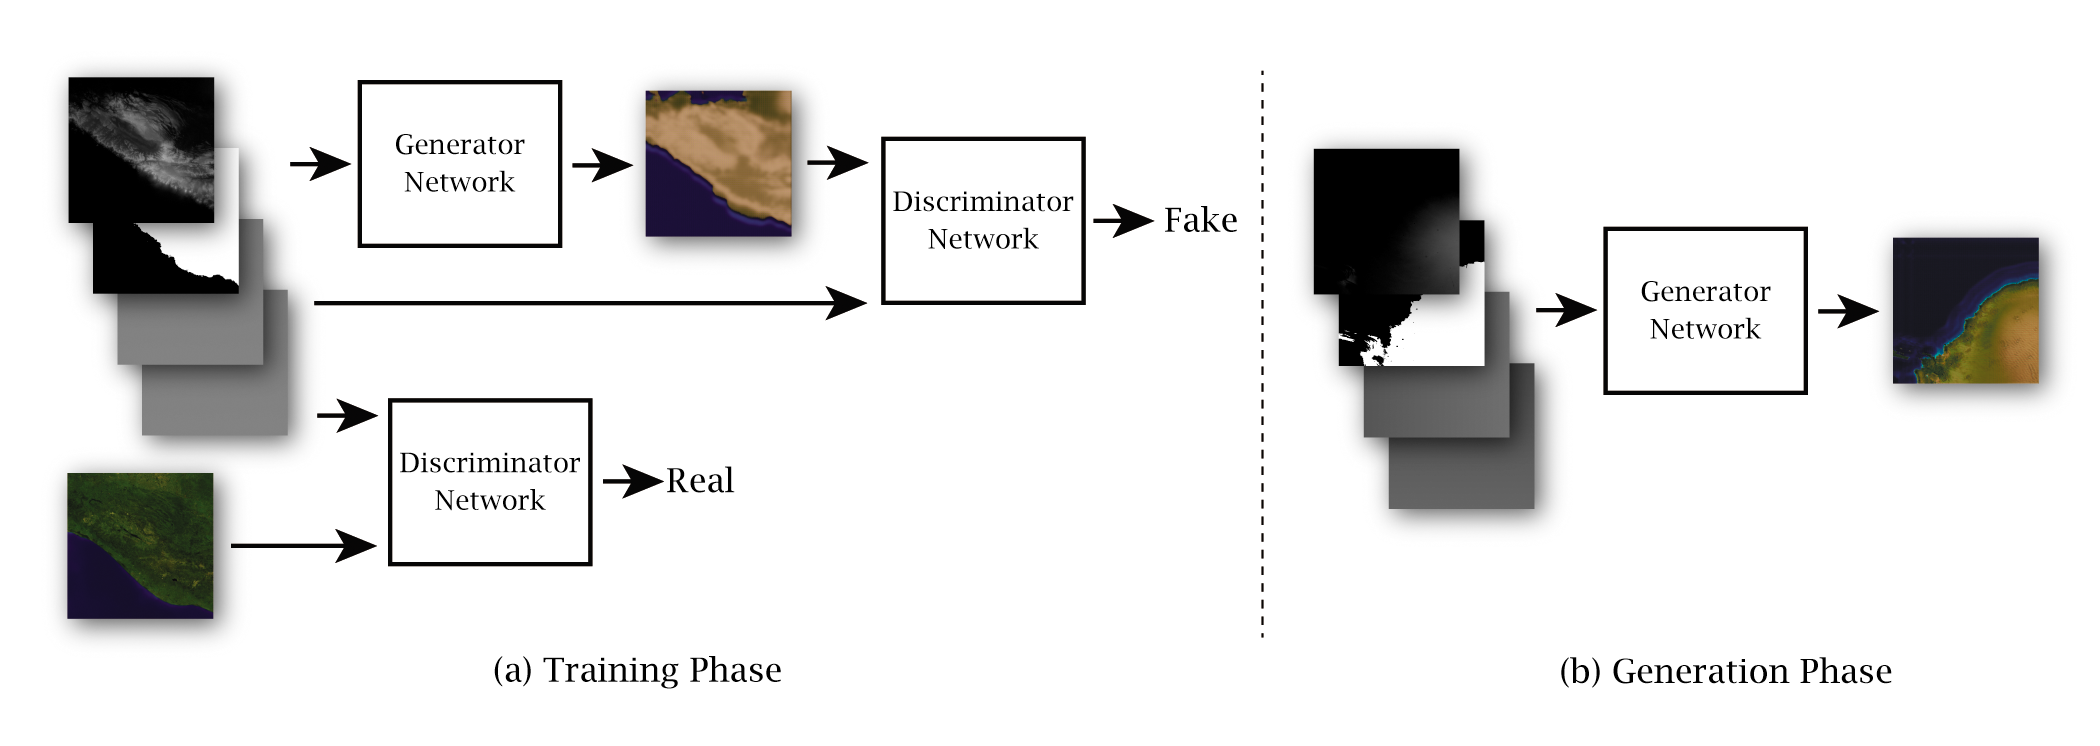  The conditional generative adversarial nets (Conditional GAN) model and data examples used in the project. Earth data was used in the training phase, while Mars data was used in the generation phase. The generator was trained to produce color images